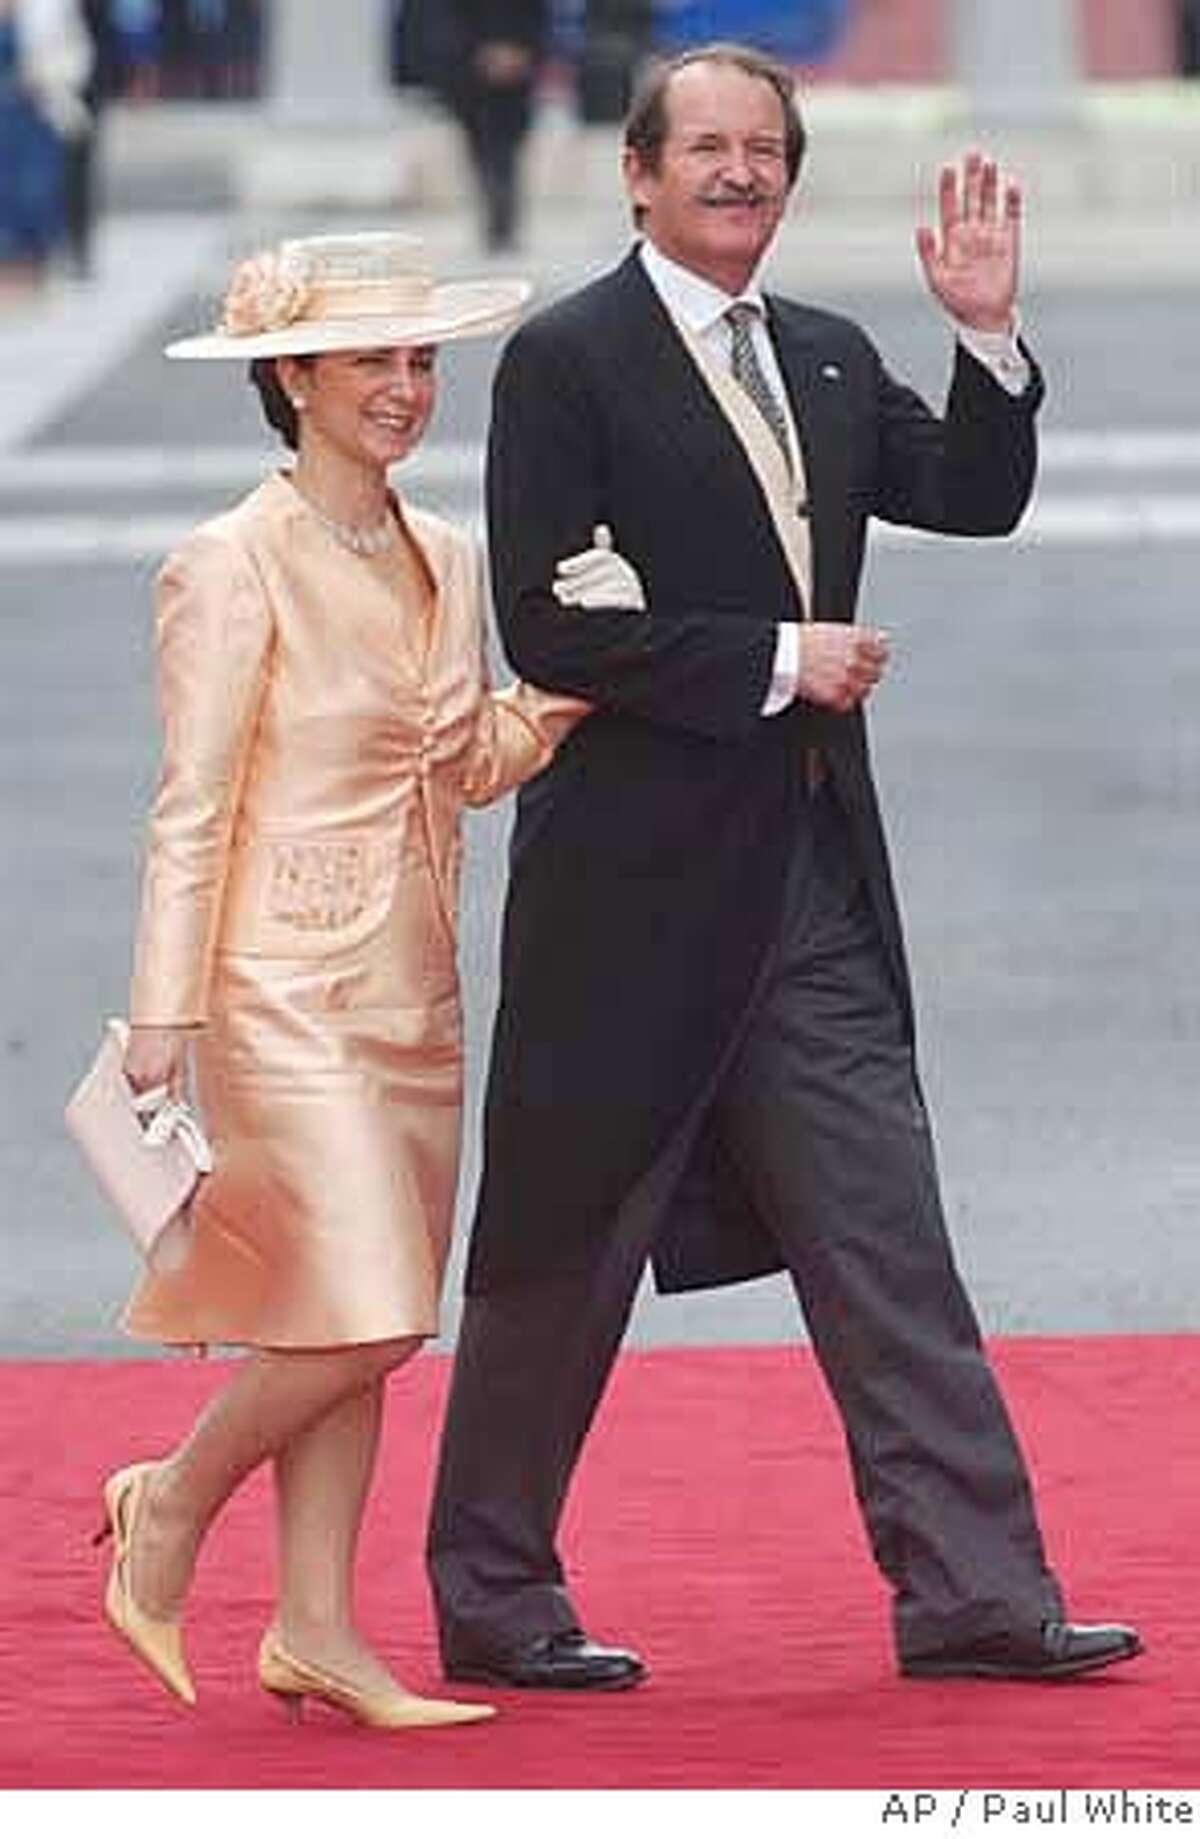 **APN ADVANCE FOR SUNDAY FEB. 17** Portugal's Duke of Braganza Duarte Pio, the next in line to the Portuguese throne, and his wife Isabel Herediaare seen arriving at Madrid's Almudena cathedral in this May 22 2004 file photo, to attend the wedding of Spain's Crown Prince Felipe to Letizia Ortiz. The centenary on Feb. 1 2008 of the assassination of Portuguese King Carlos I has taken Duarte Pio beyond the pages of glossy magazines and into the mainstream political debate. Pio would by birthright be sovereign if Portugal restored its monarchy, and he is using public interest in the Friday centenary of King Carlos I's assassination to make his case for a return to royal influence on a continent proud of its democratic traditions. He claims that at the start of the past century, before republicans deposed Carlos I's successor - Manuel II - by force in 1910, Portugal packed a bigger economic and diplomatic punch than it does now as one of the European Union's lightweights. (AP Photo/Paul White) **APN ADVANCE FOR SUNDAY FEB. 17**